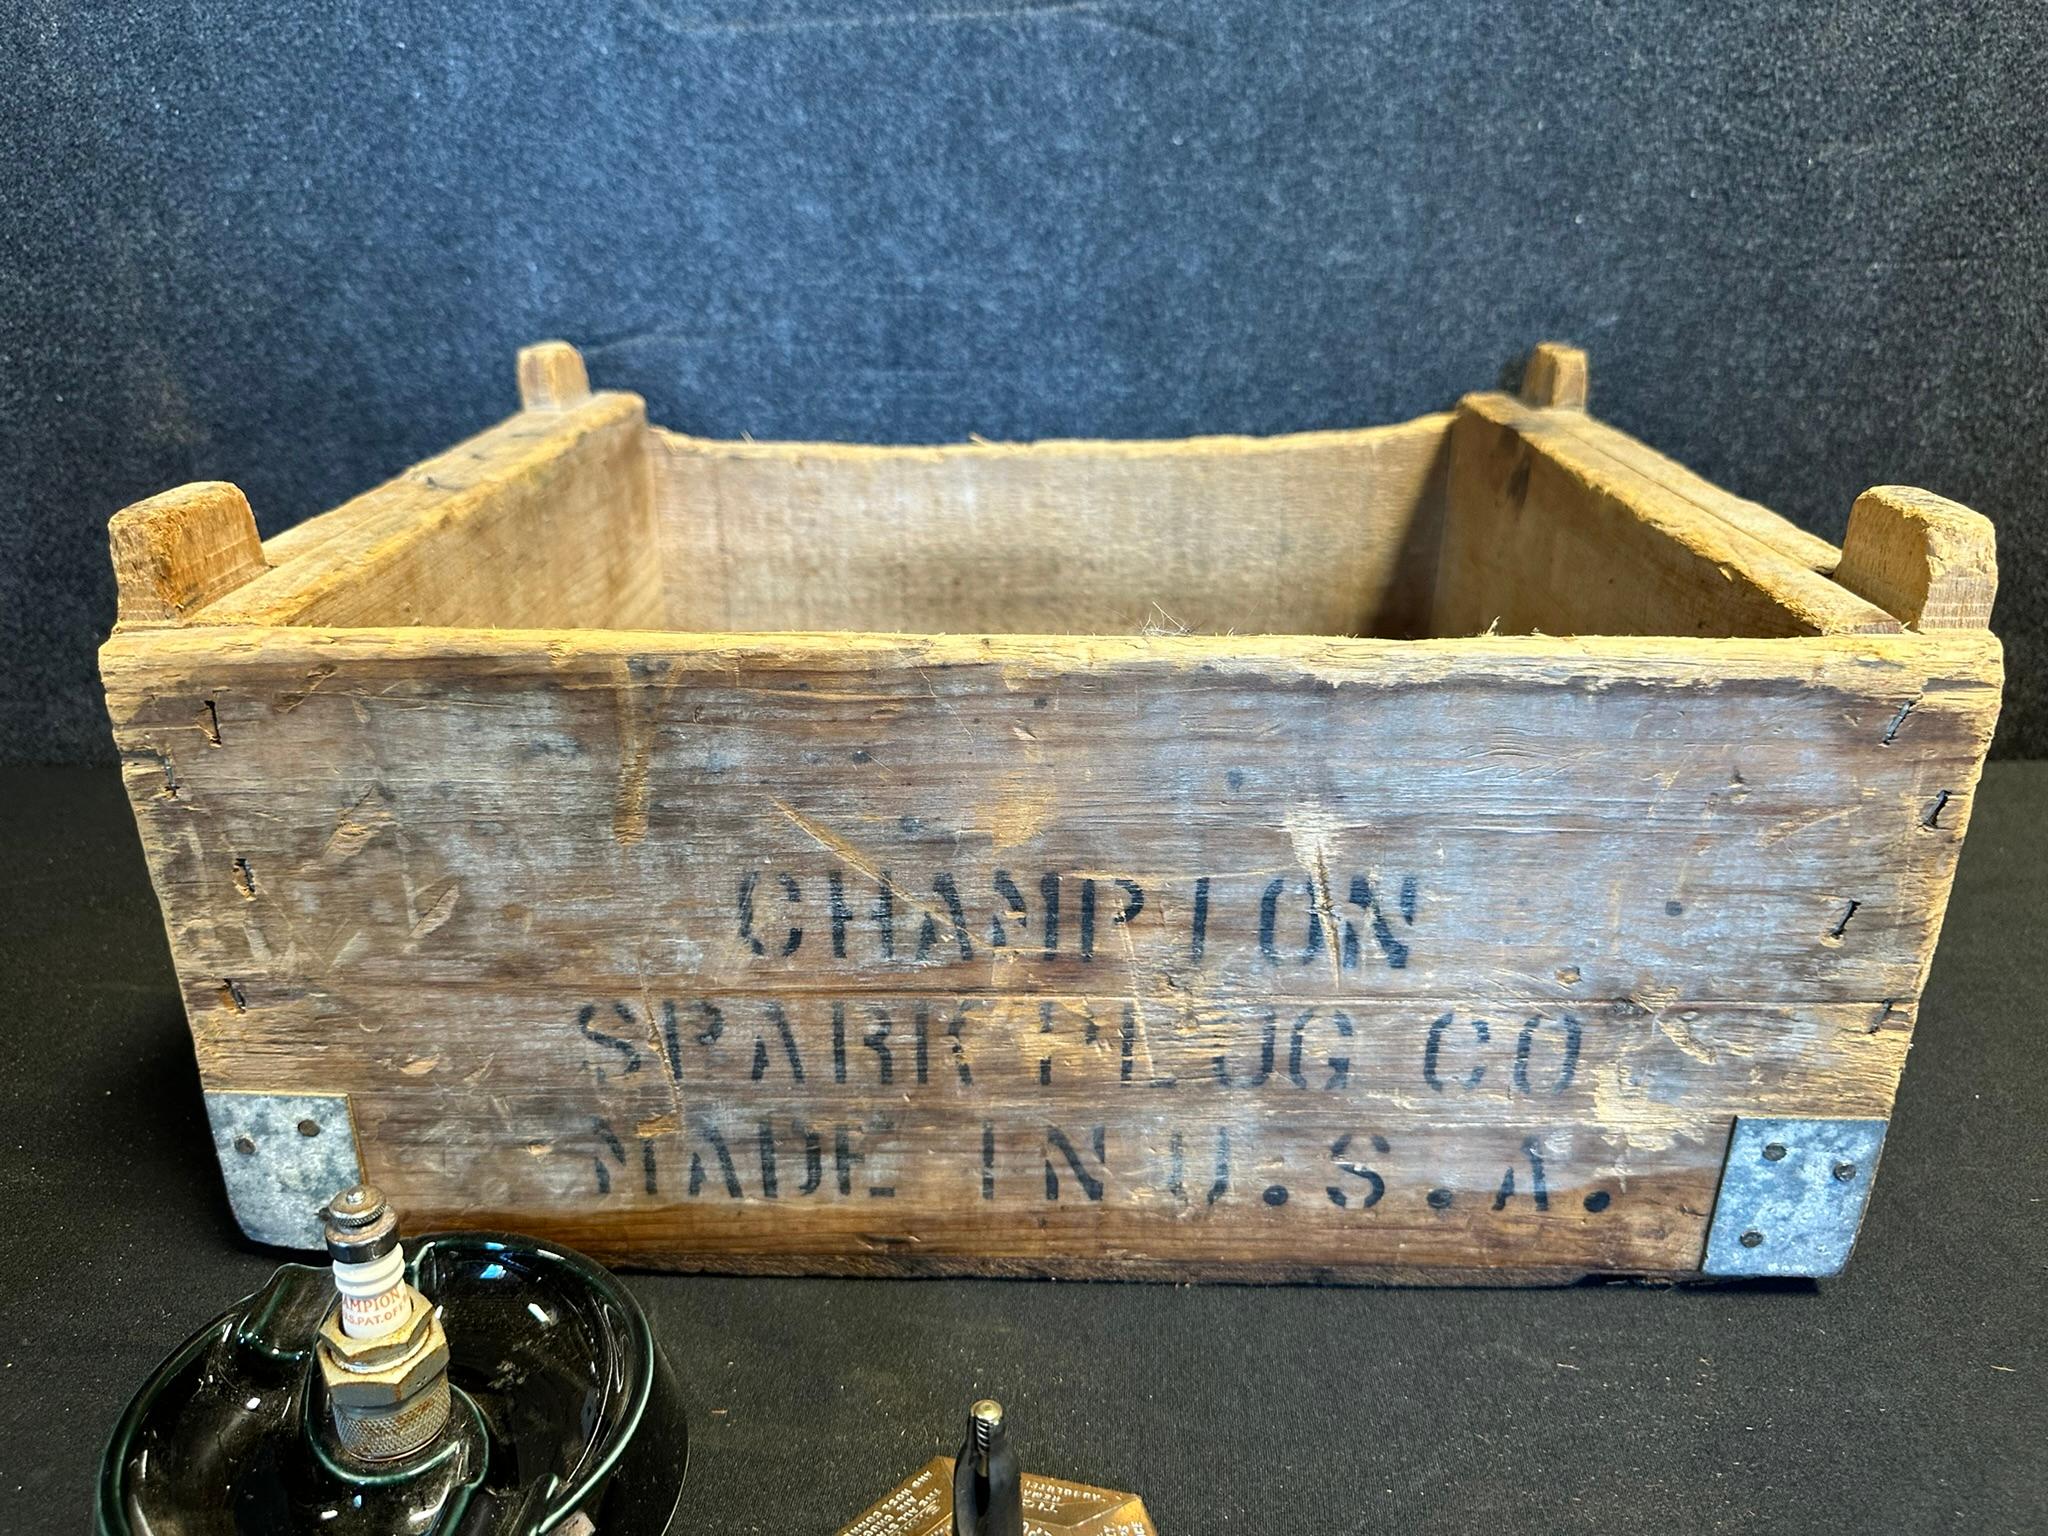 Champion Spark Plug Lot: Wooden Shipping Crate, Ashtray & Jenkins Bros Valve Store Display